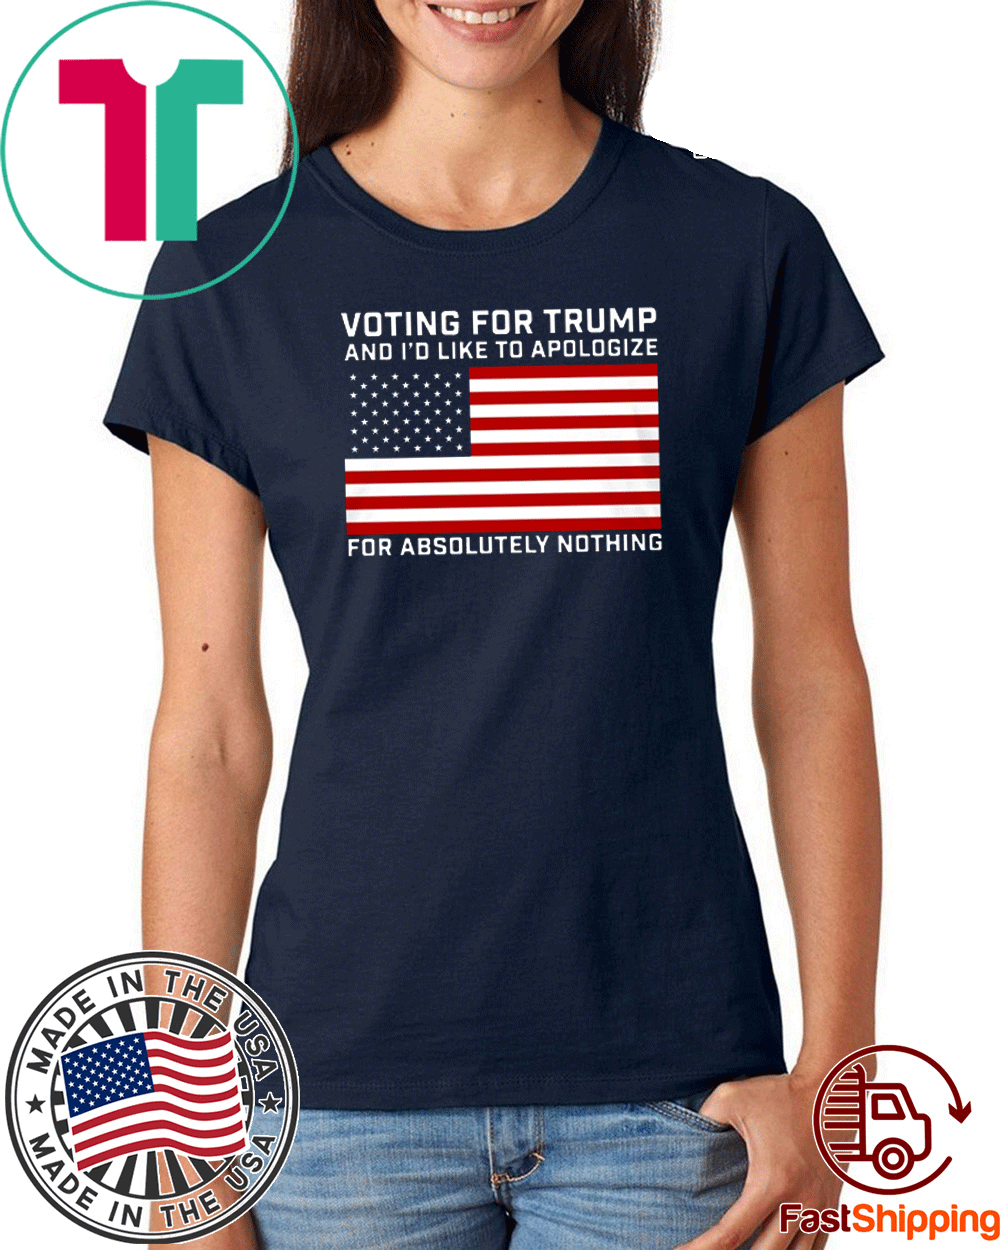 Voting For Trump And I’d Like To Apologize For Absolutely Nothing Shirt ...